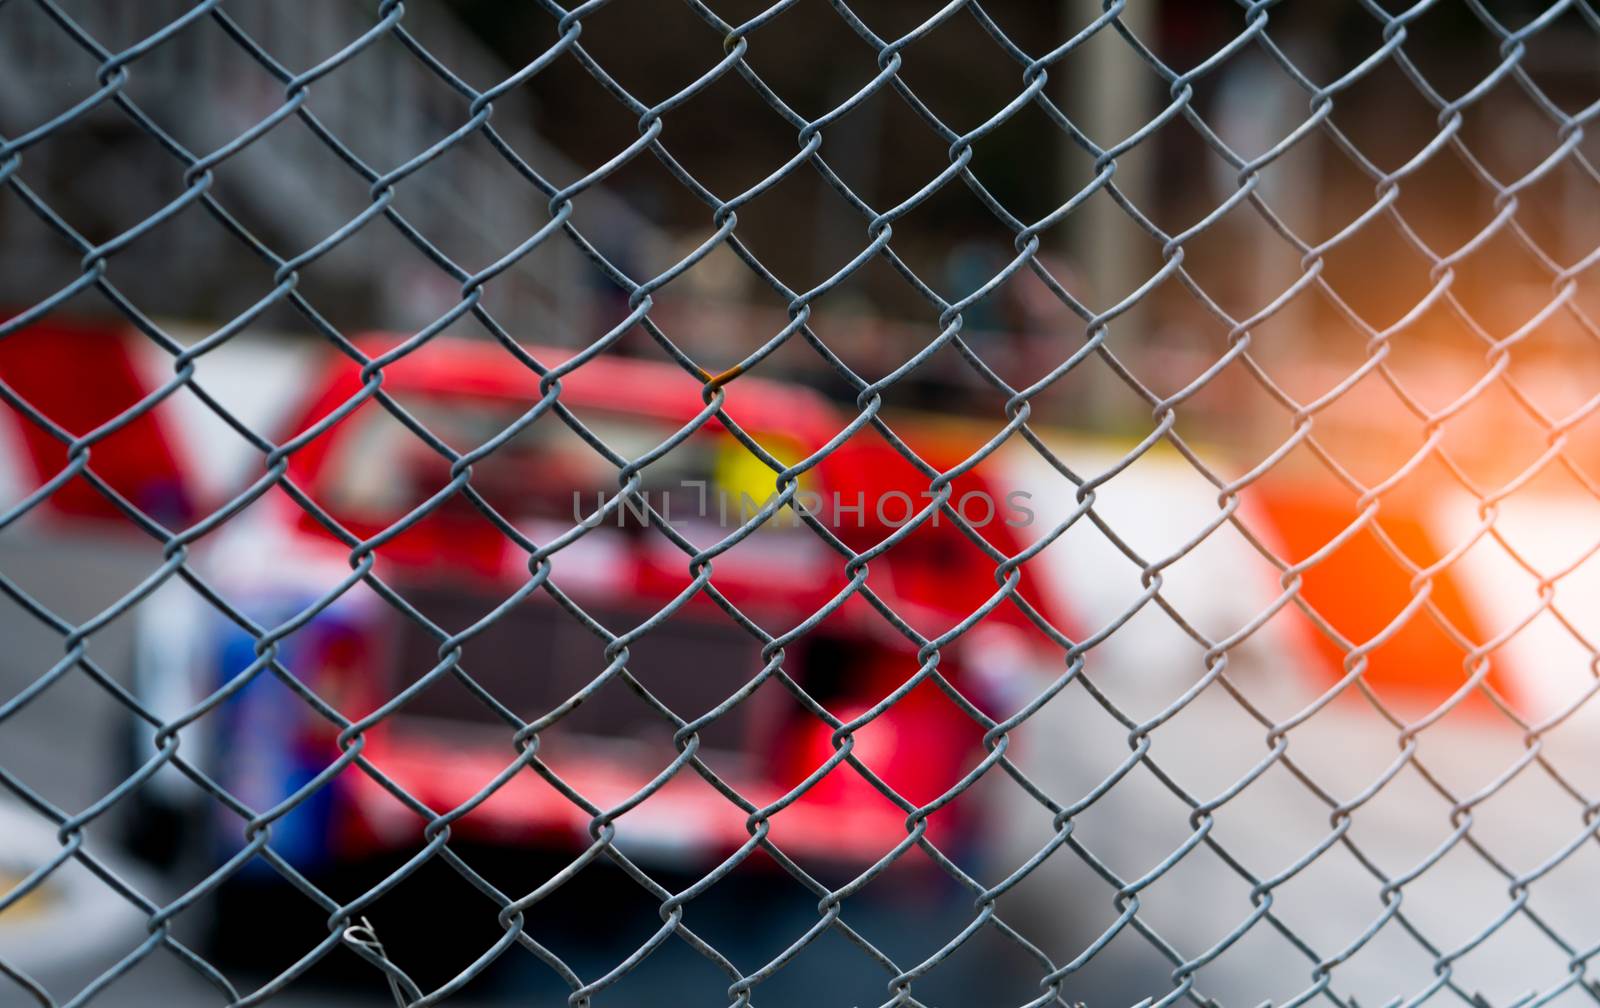 Motorsport car racing on asphalt road. View from the fence mesh netting on blurred car on racetrack background. Super racing car on street circuit. Automotive industry concept.